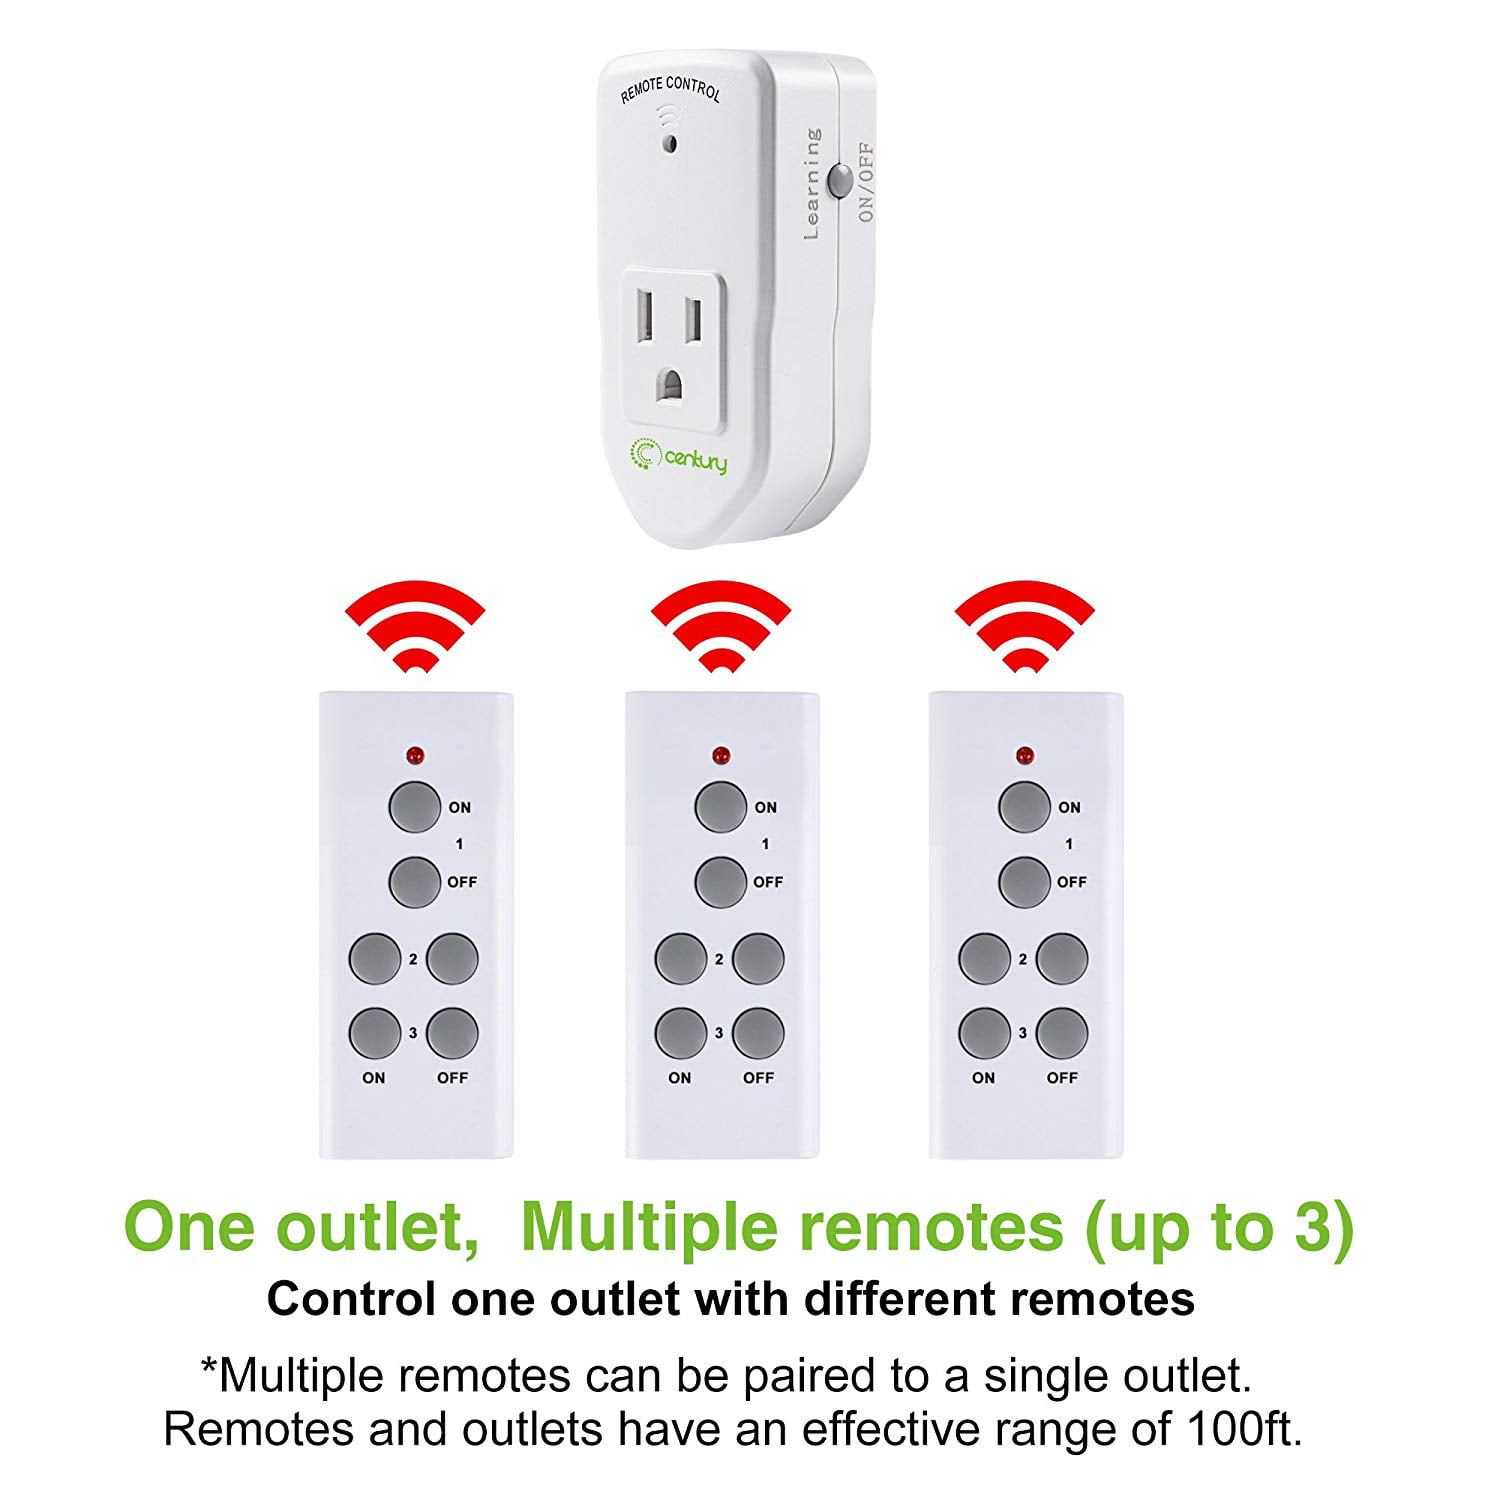 BN-LINK Wireless Remote Control Outlet Plugs with 2 remotes and 5 sockets  Indoor